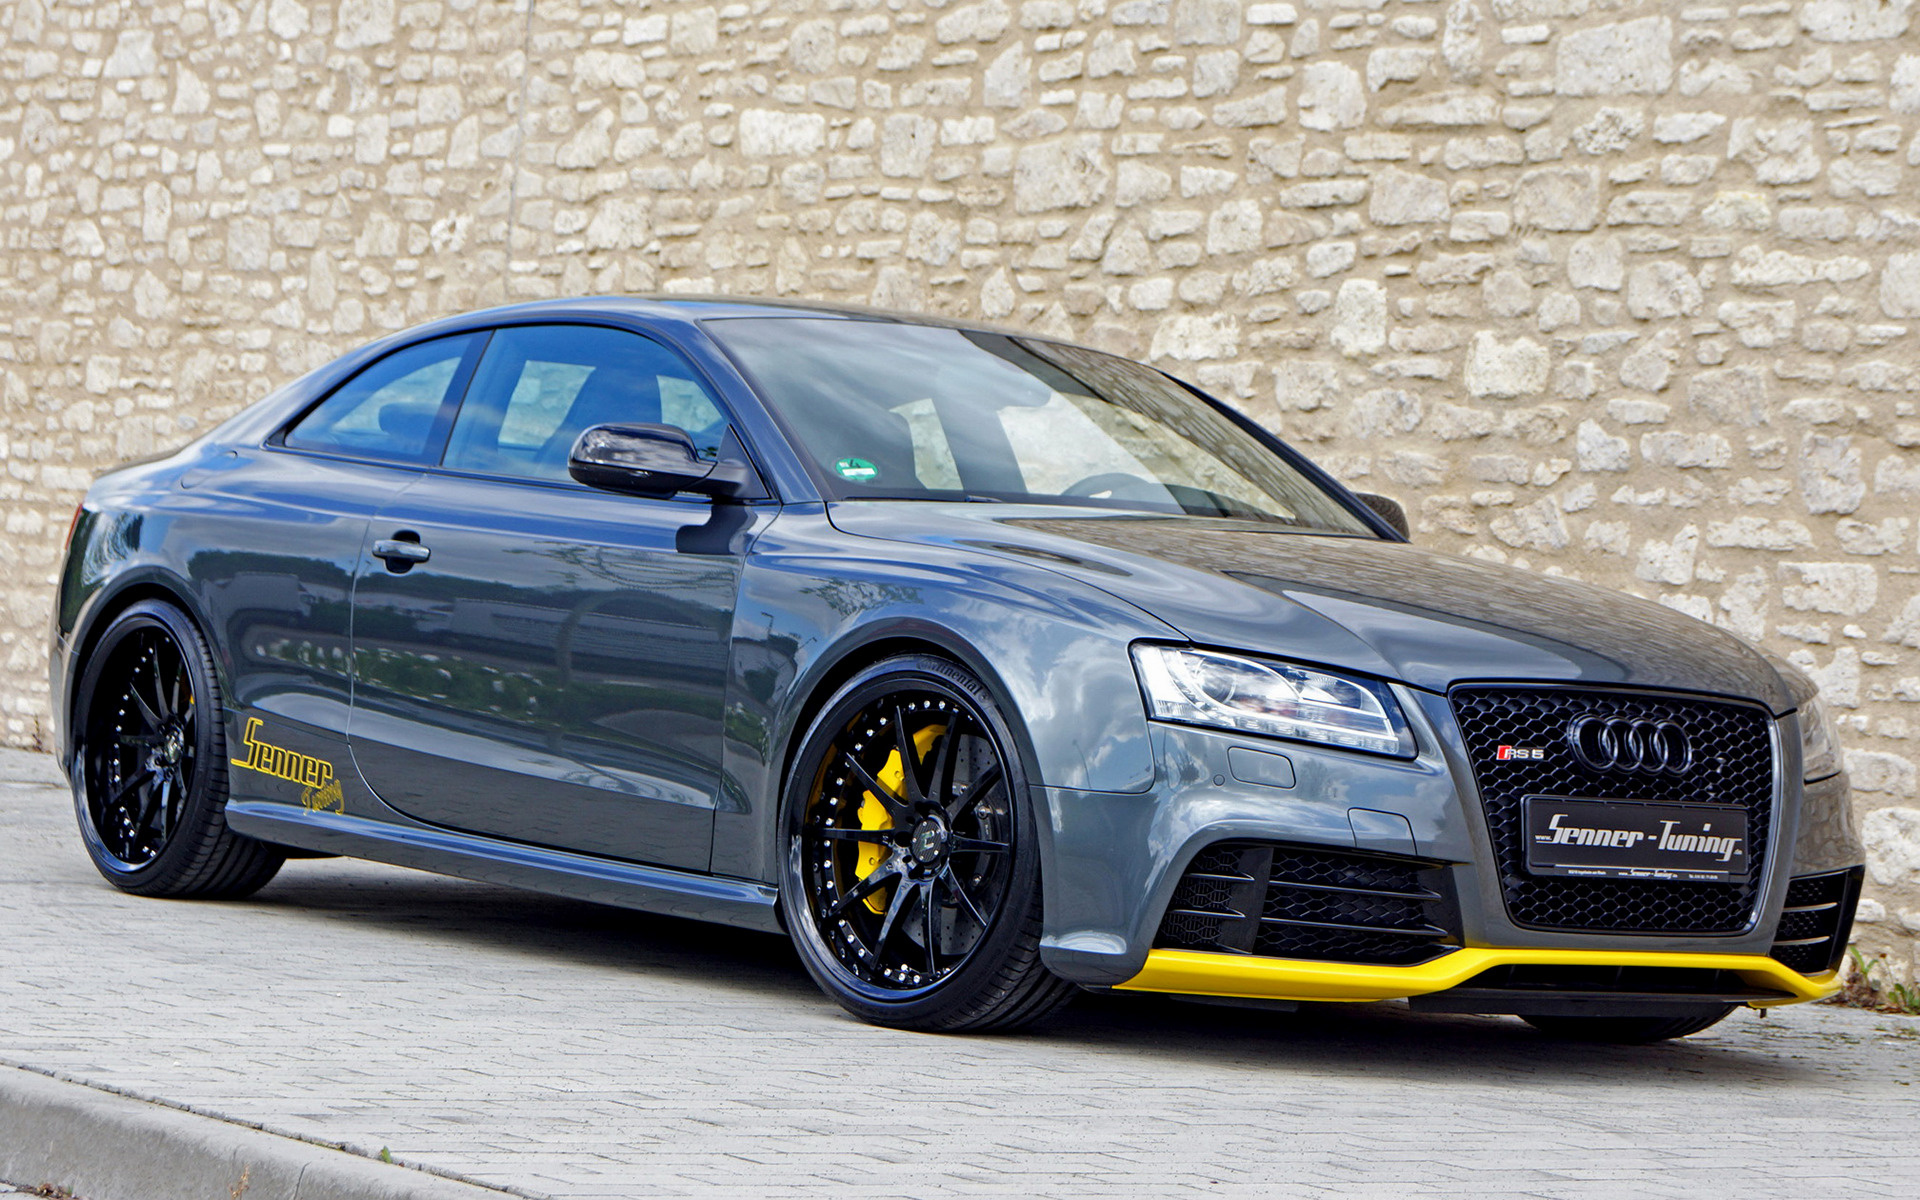 2014 Audi RS 5 Coupe by Senner Tuning - Wallpapers and HD Images